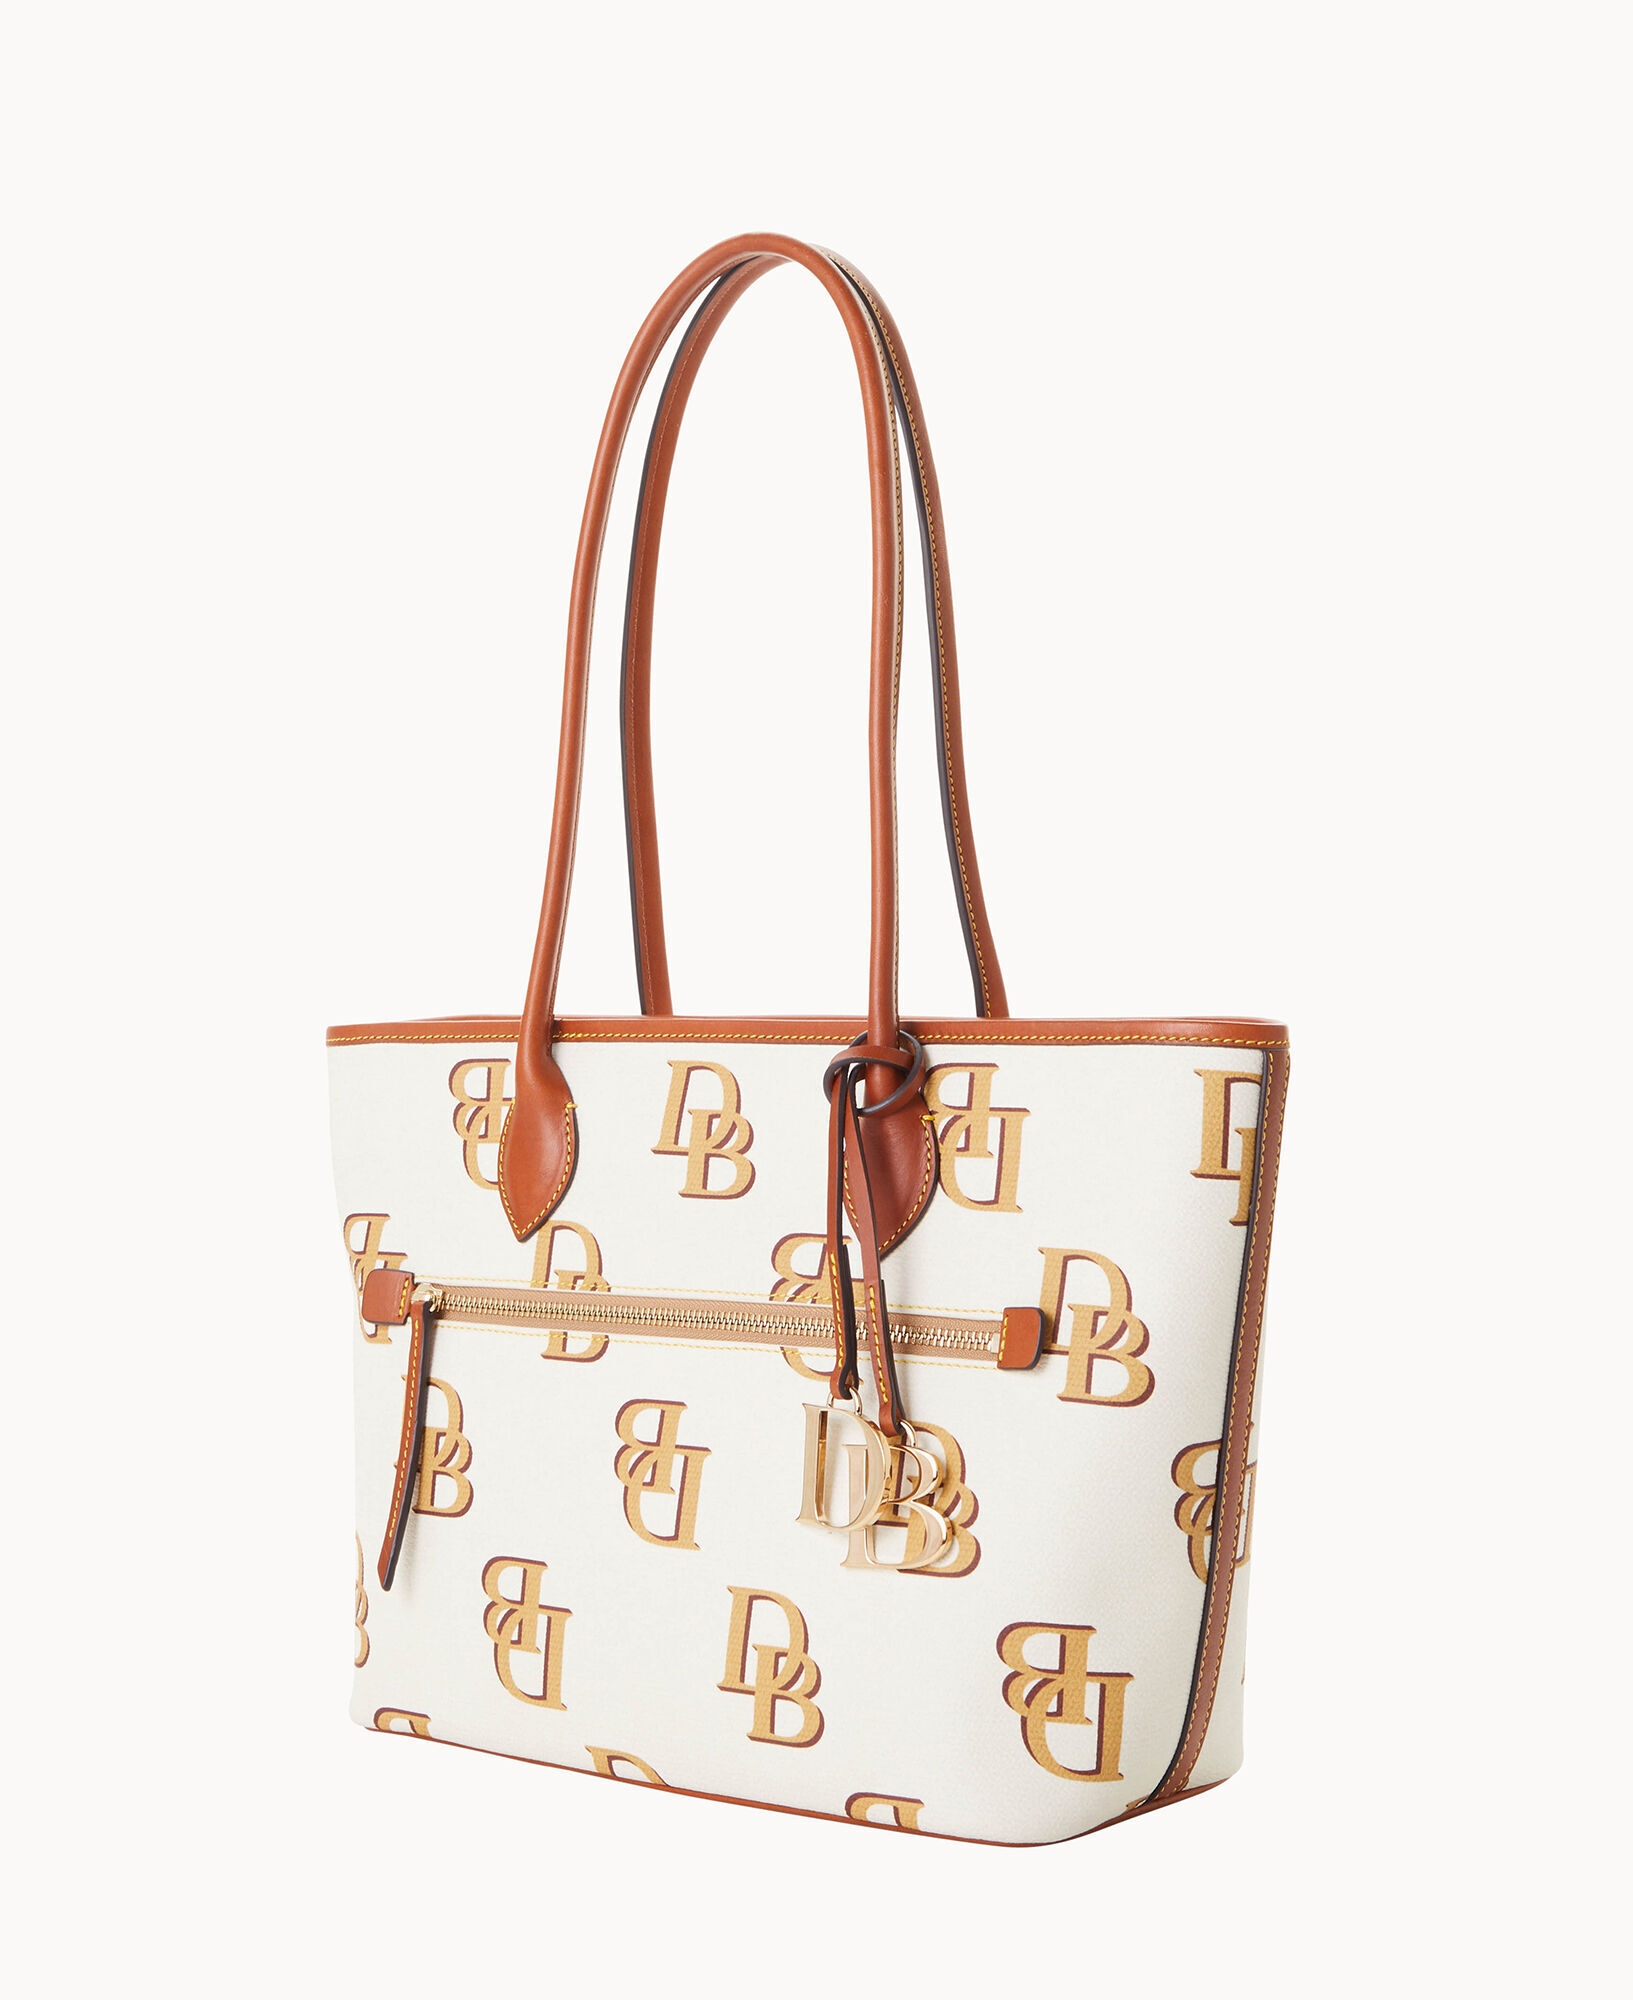 Monogrammed Everyday Italian Leather Tote Bag